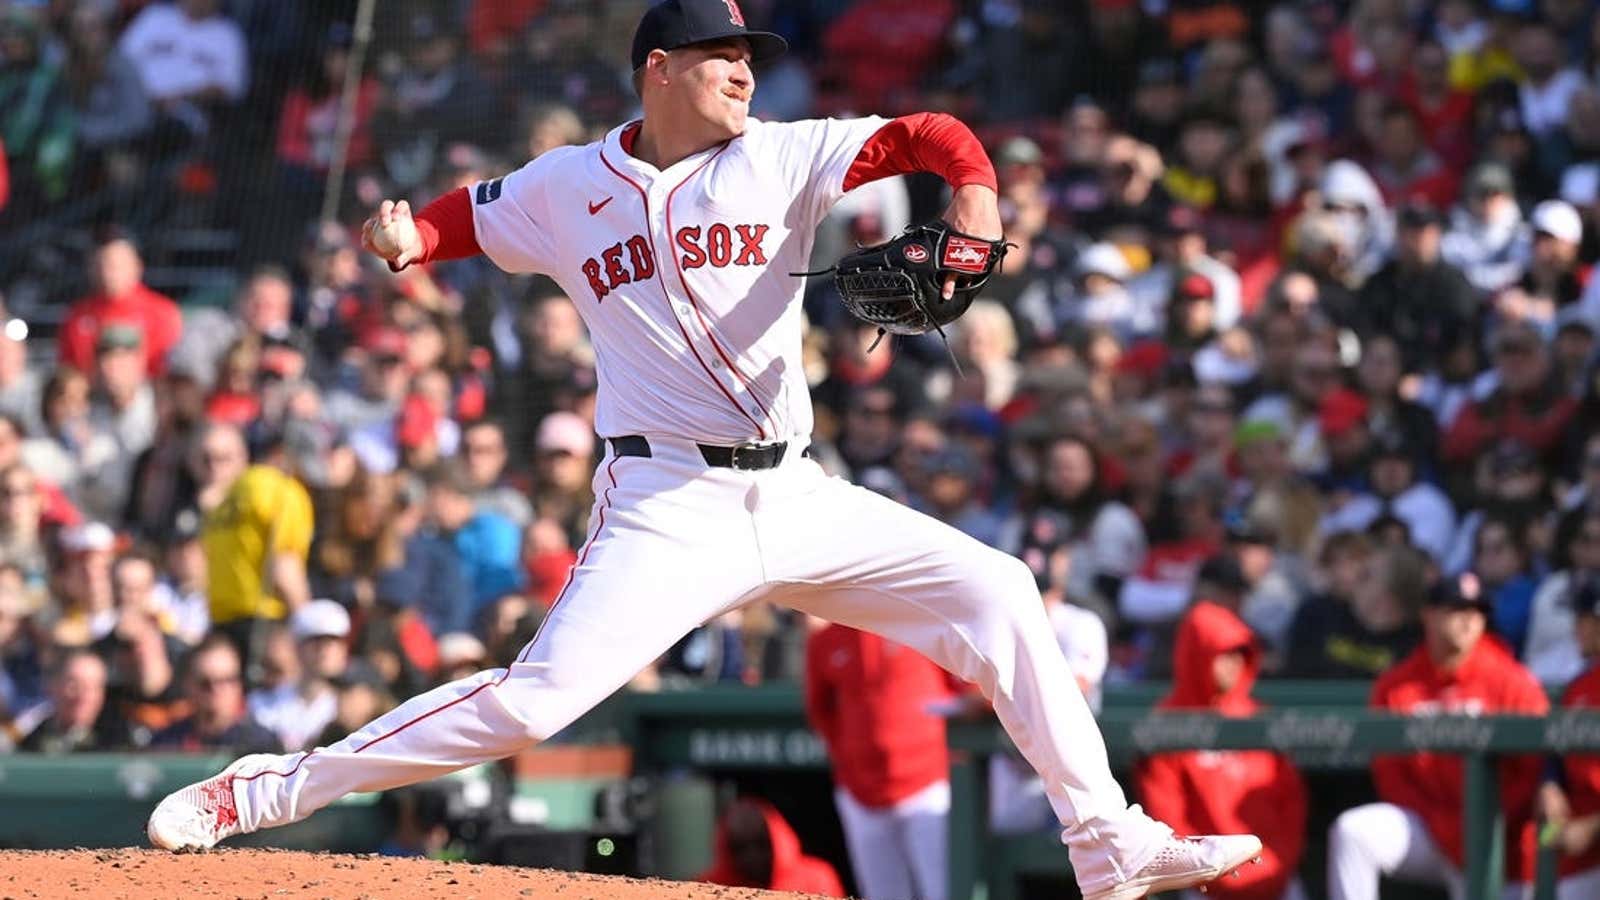 Image for Riding strong pitching staff, Red Sox eye sweep of Giants